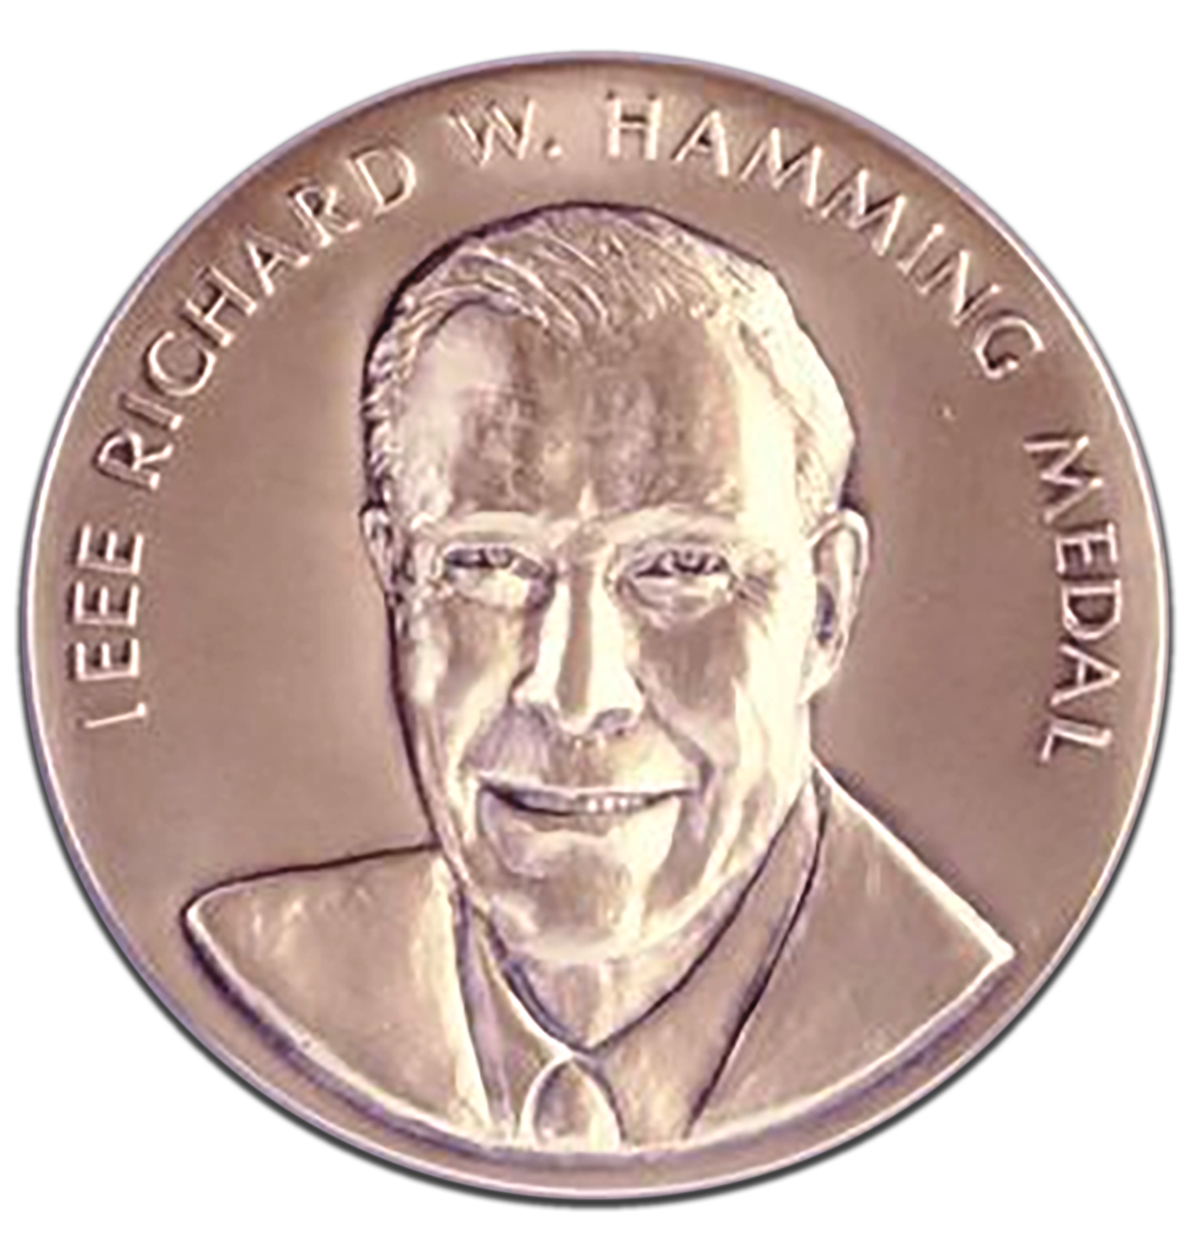 The IEEE Richard Hamming Medal. Image via the Engineering and Technology History Wiki. 